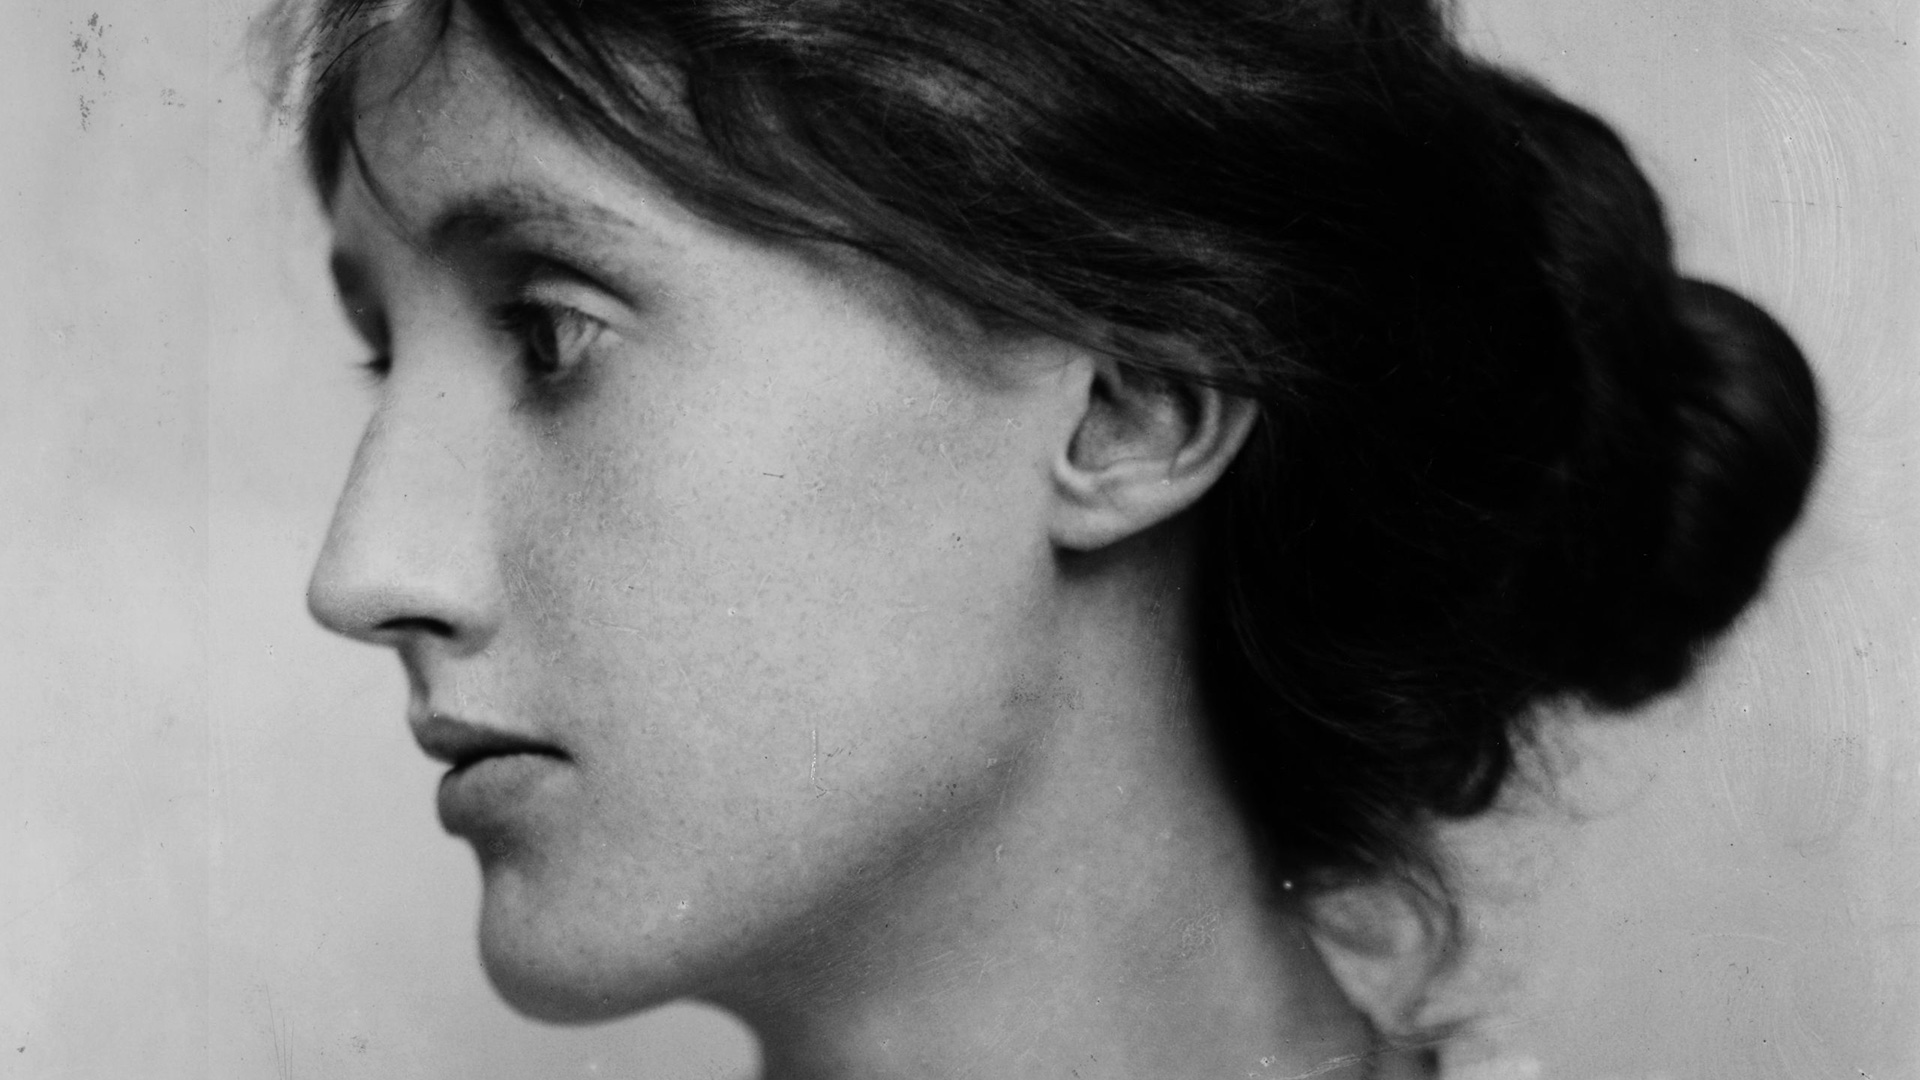 May 14, 1925: “Mrs. Dalloway” By Virginia Woolf Was Published - Lifetime